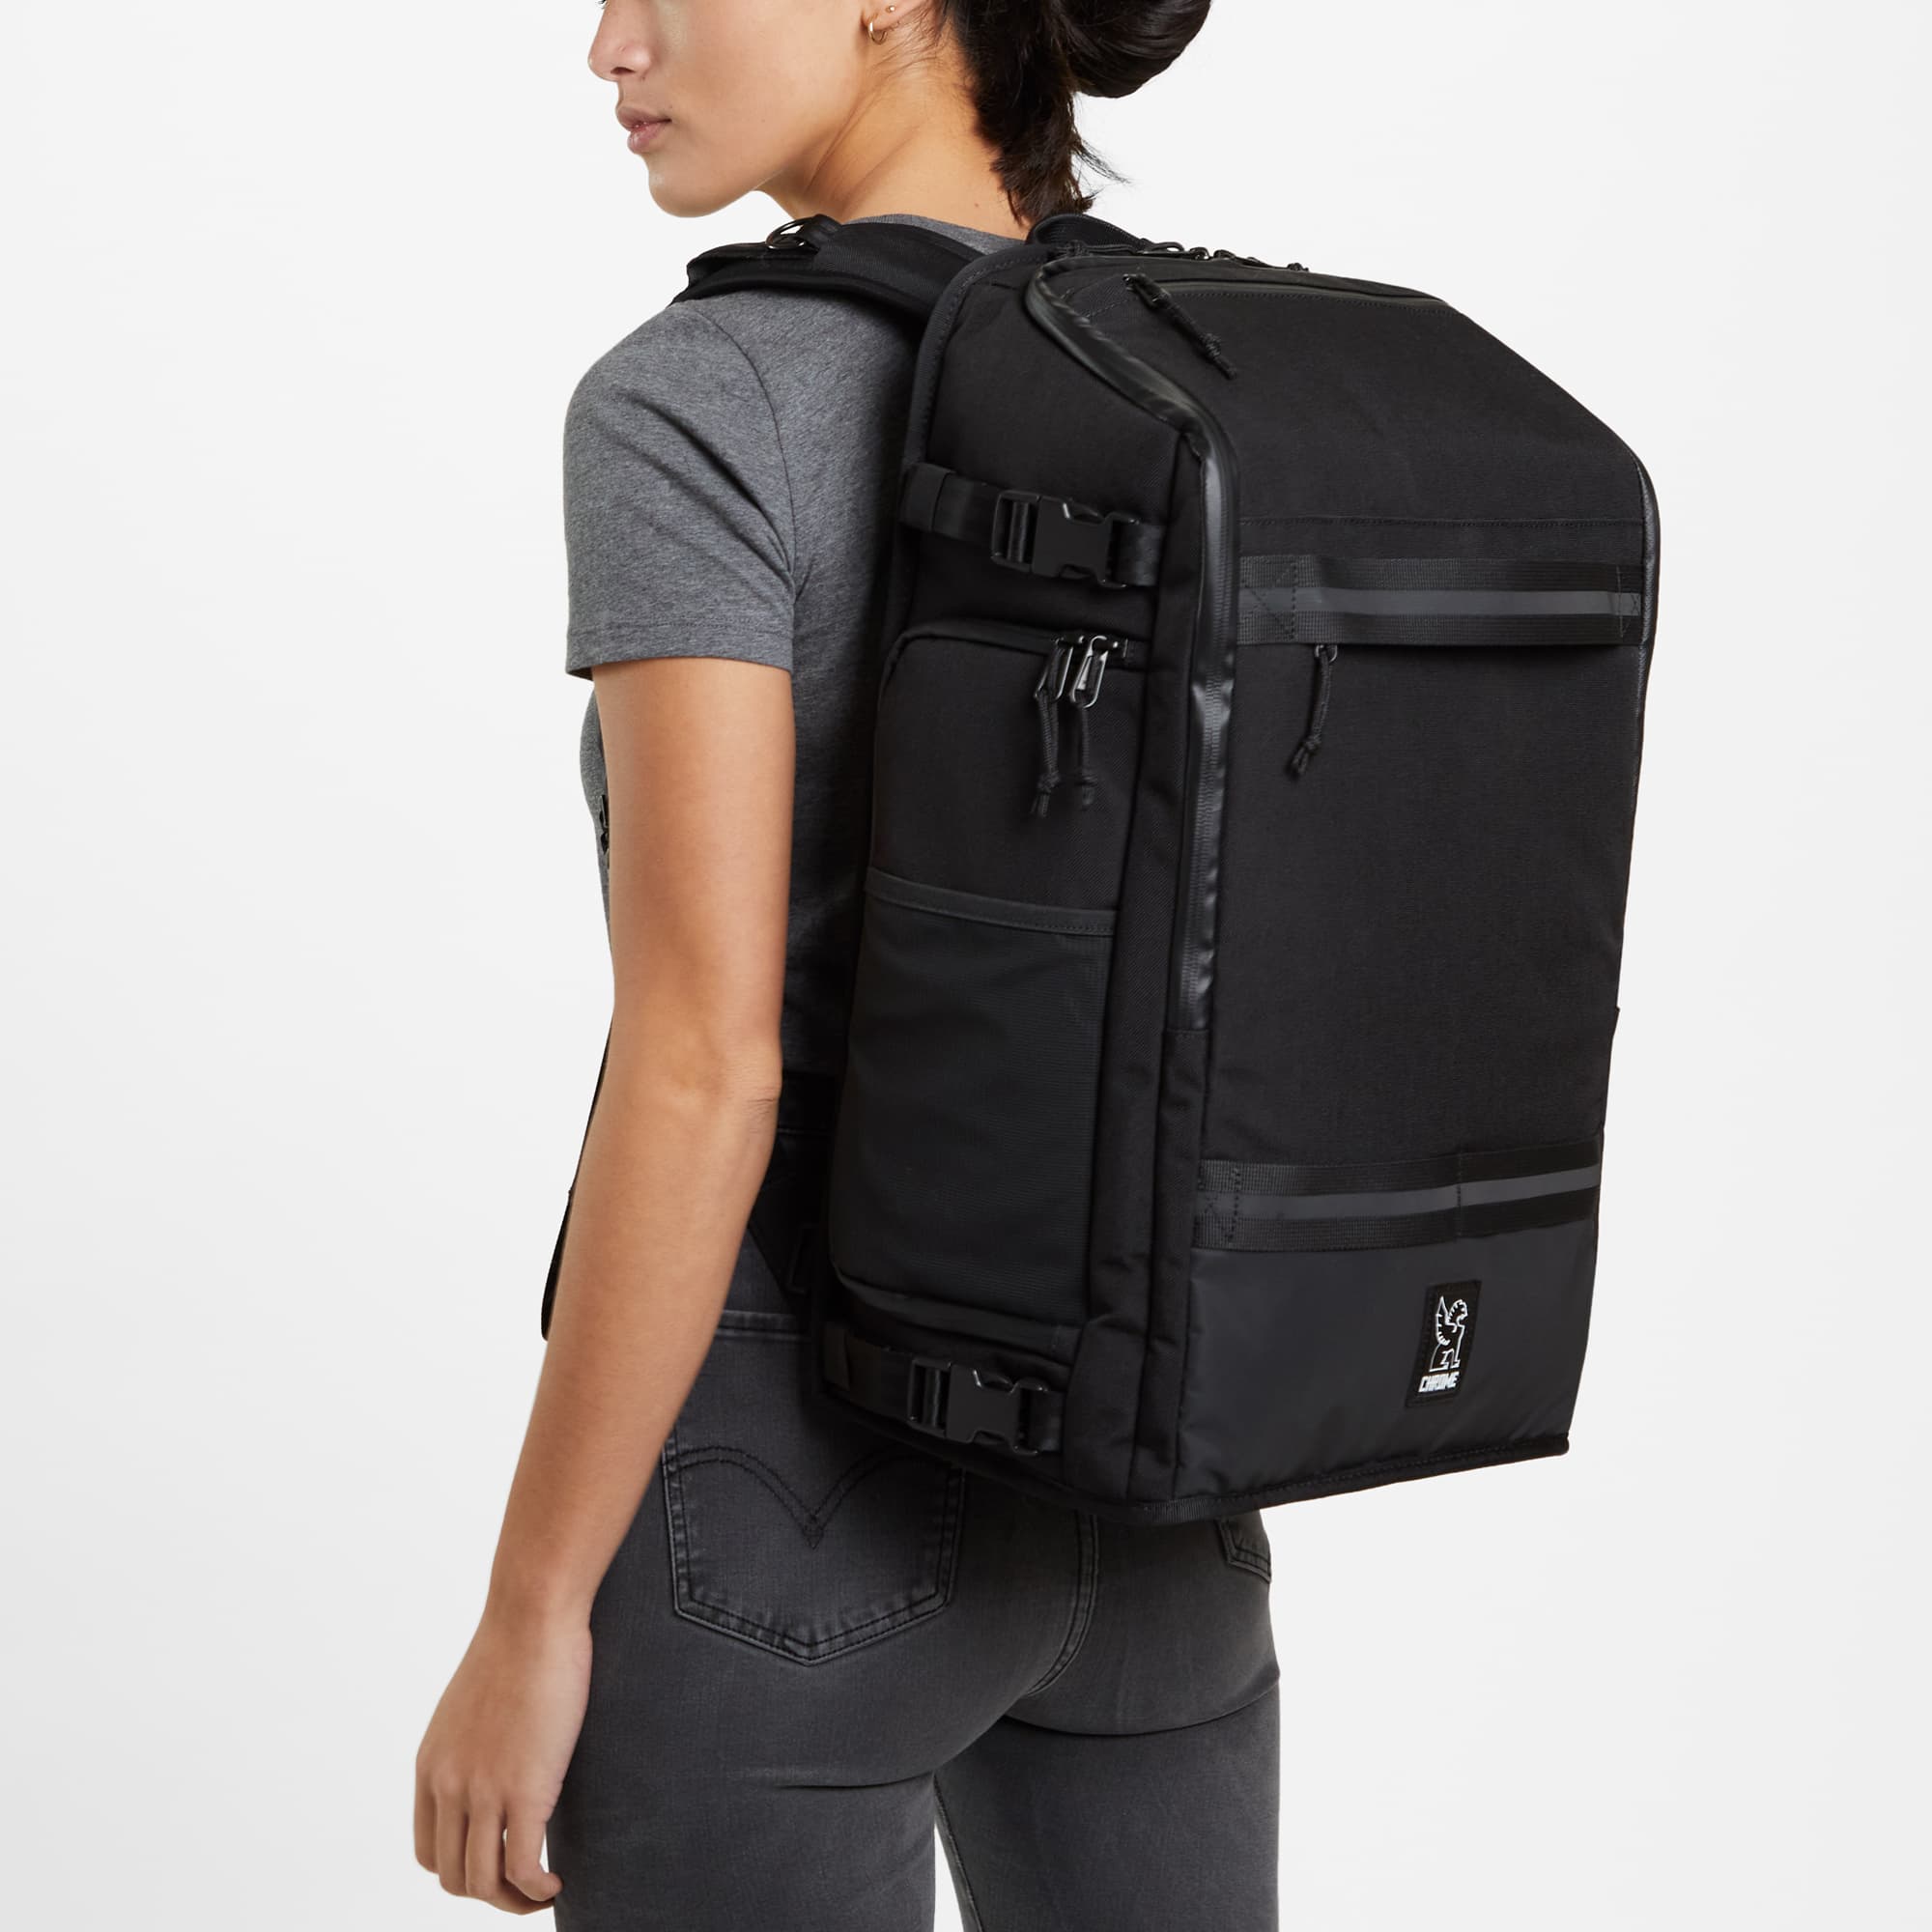 Niko camera tech backpack in black worn by a woman